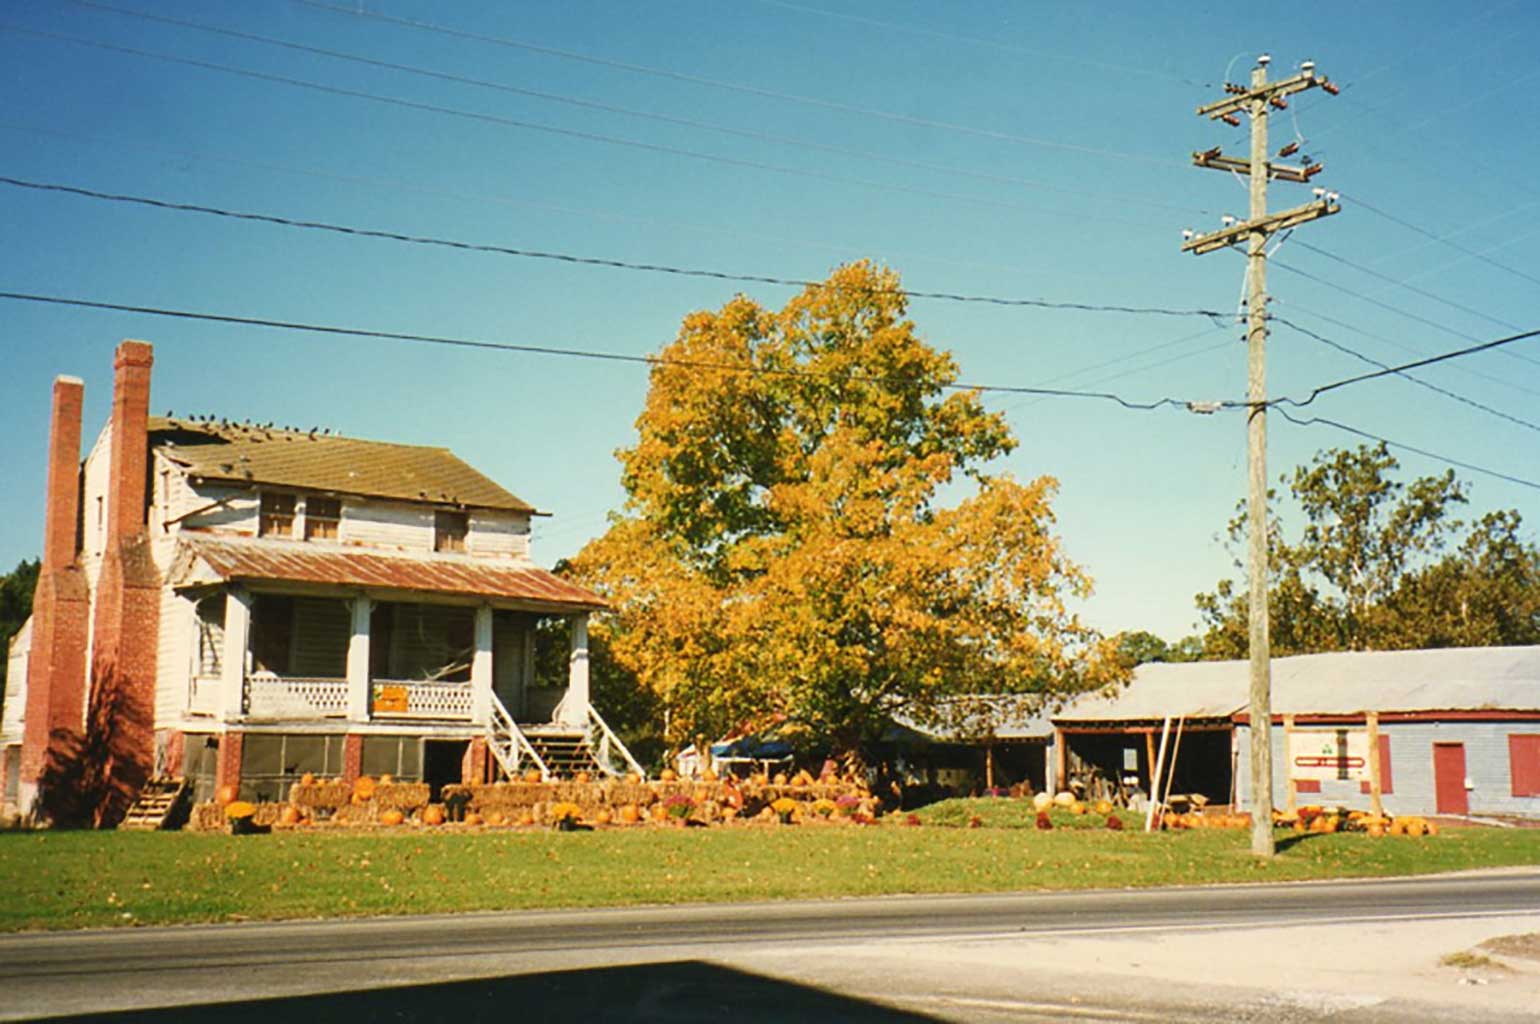 spady-home-at-haloween-in-1995-plus-outbuildings-img296